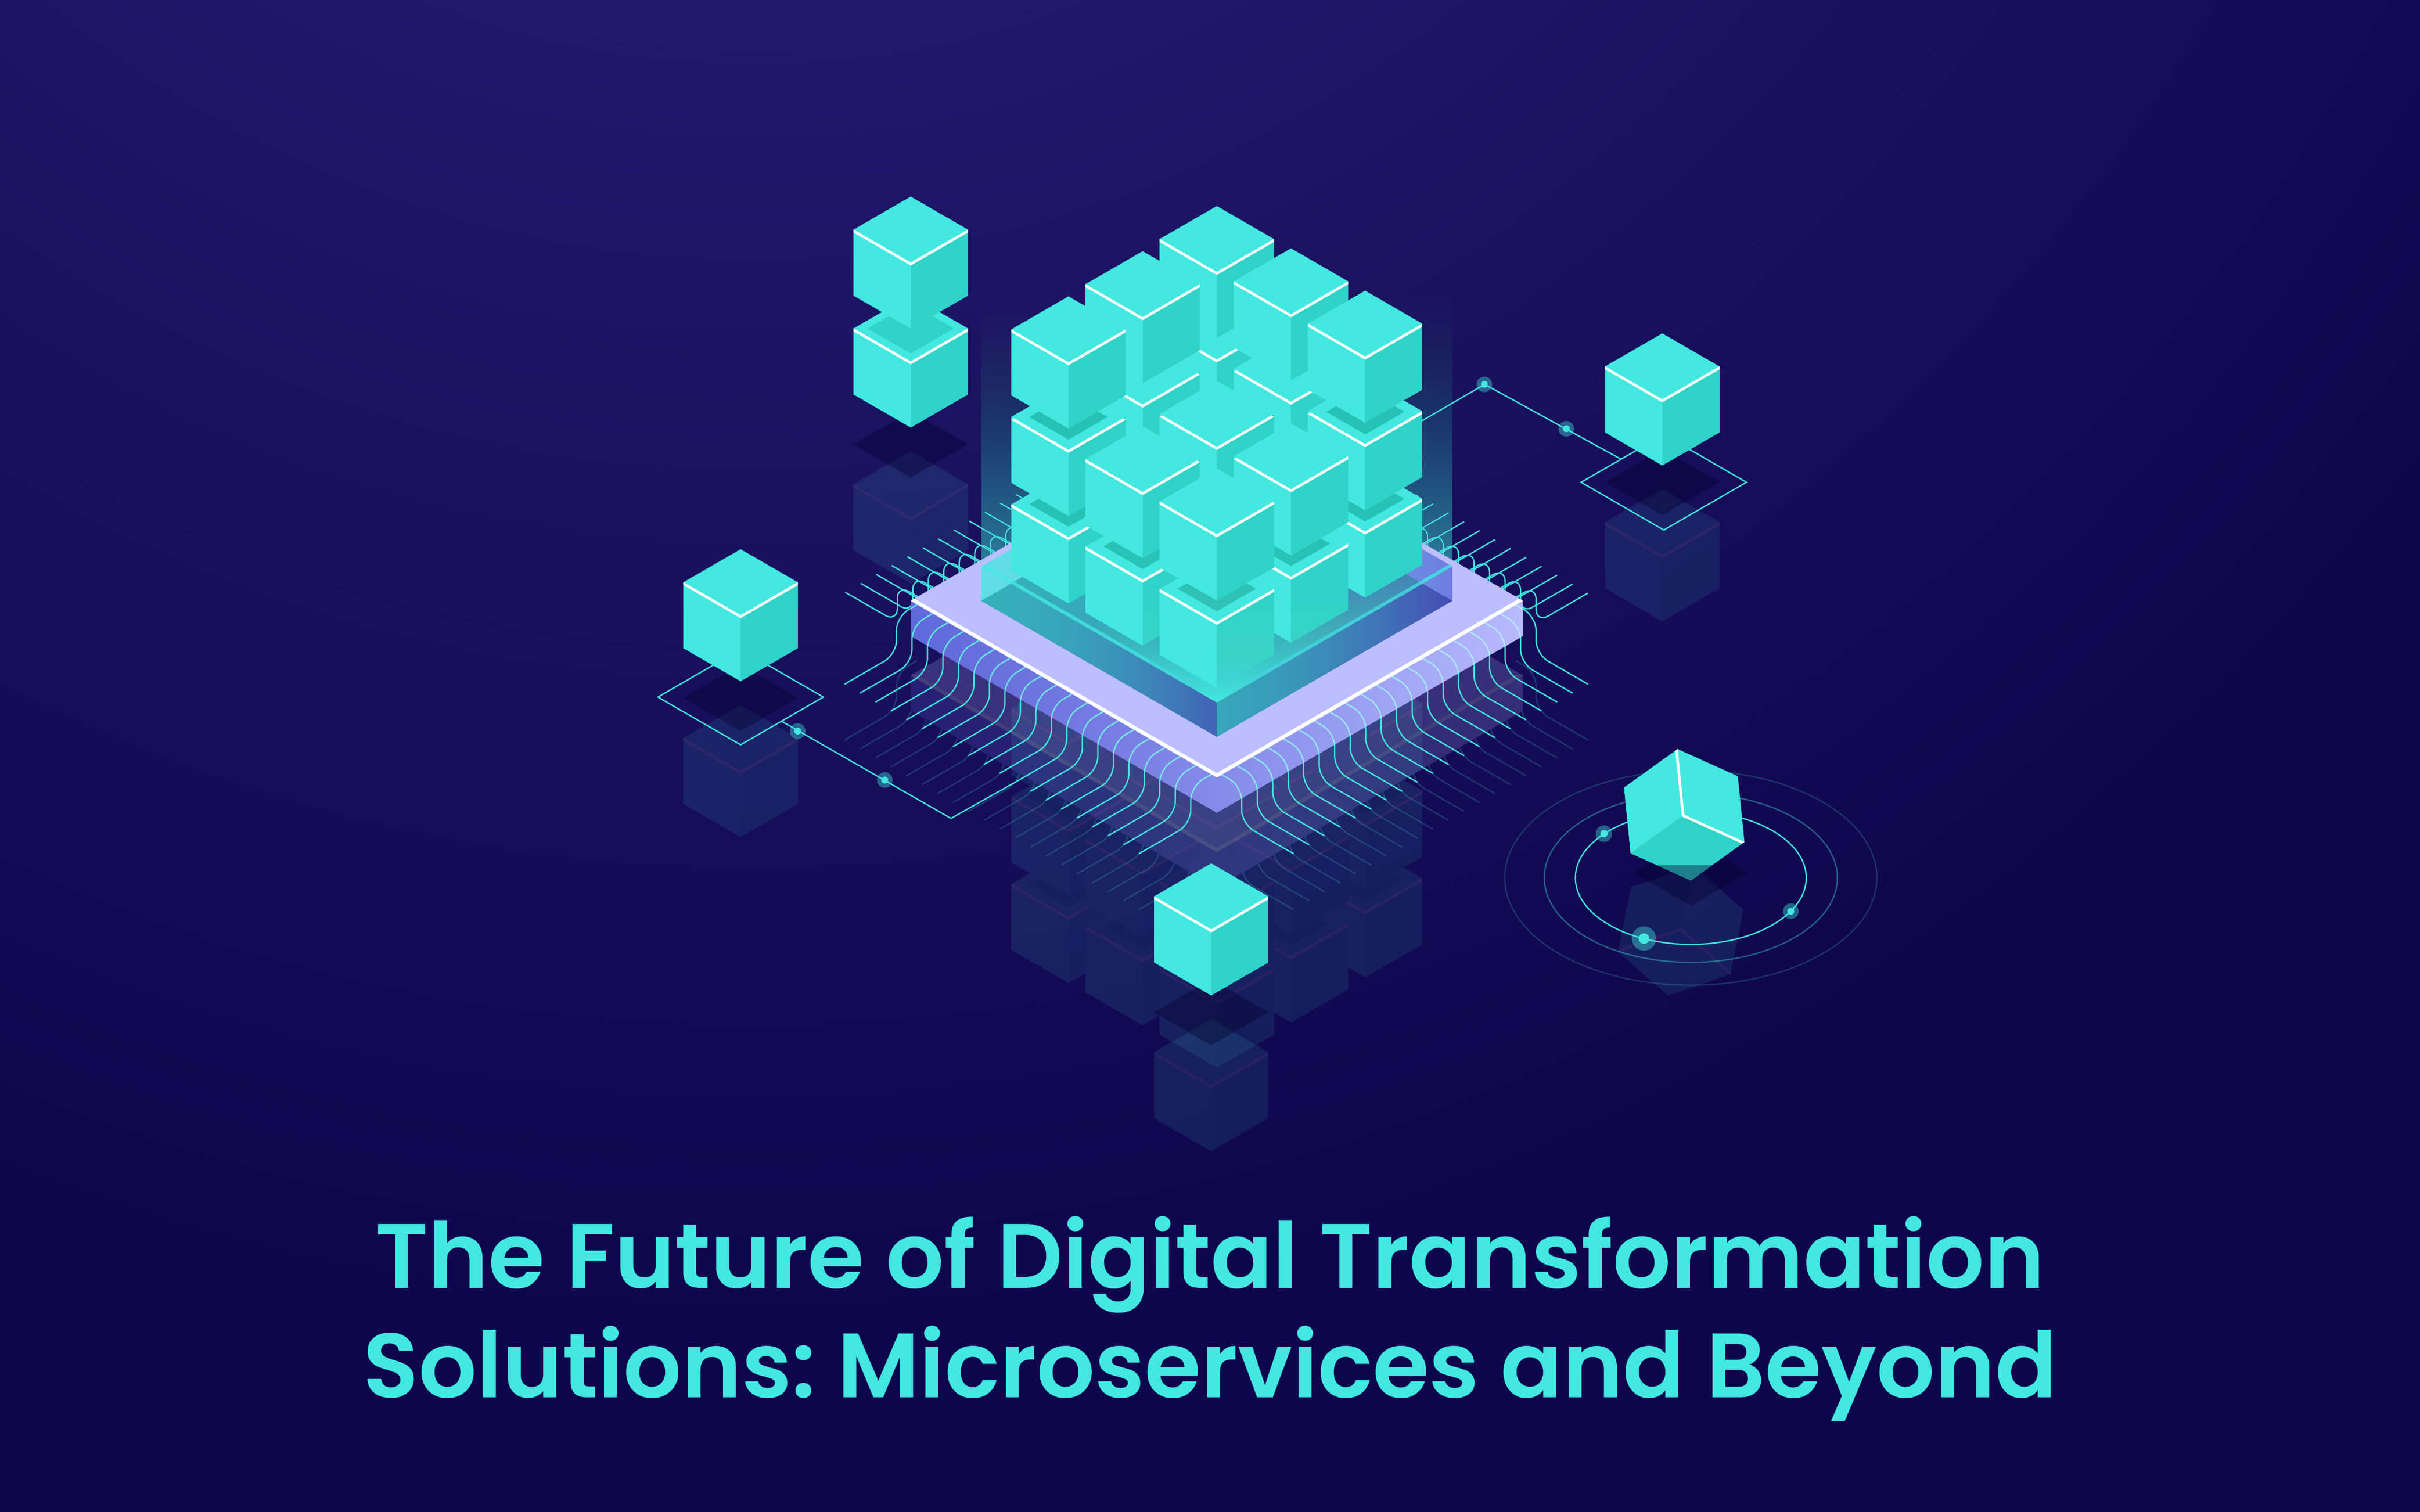 The Future of Digital Transformation Solutions: Microservices and Beyond